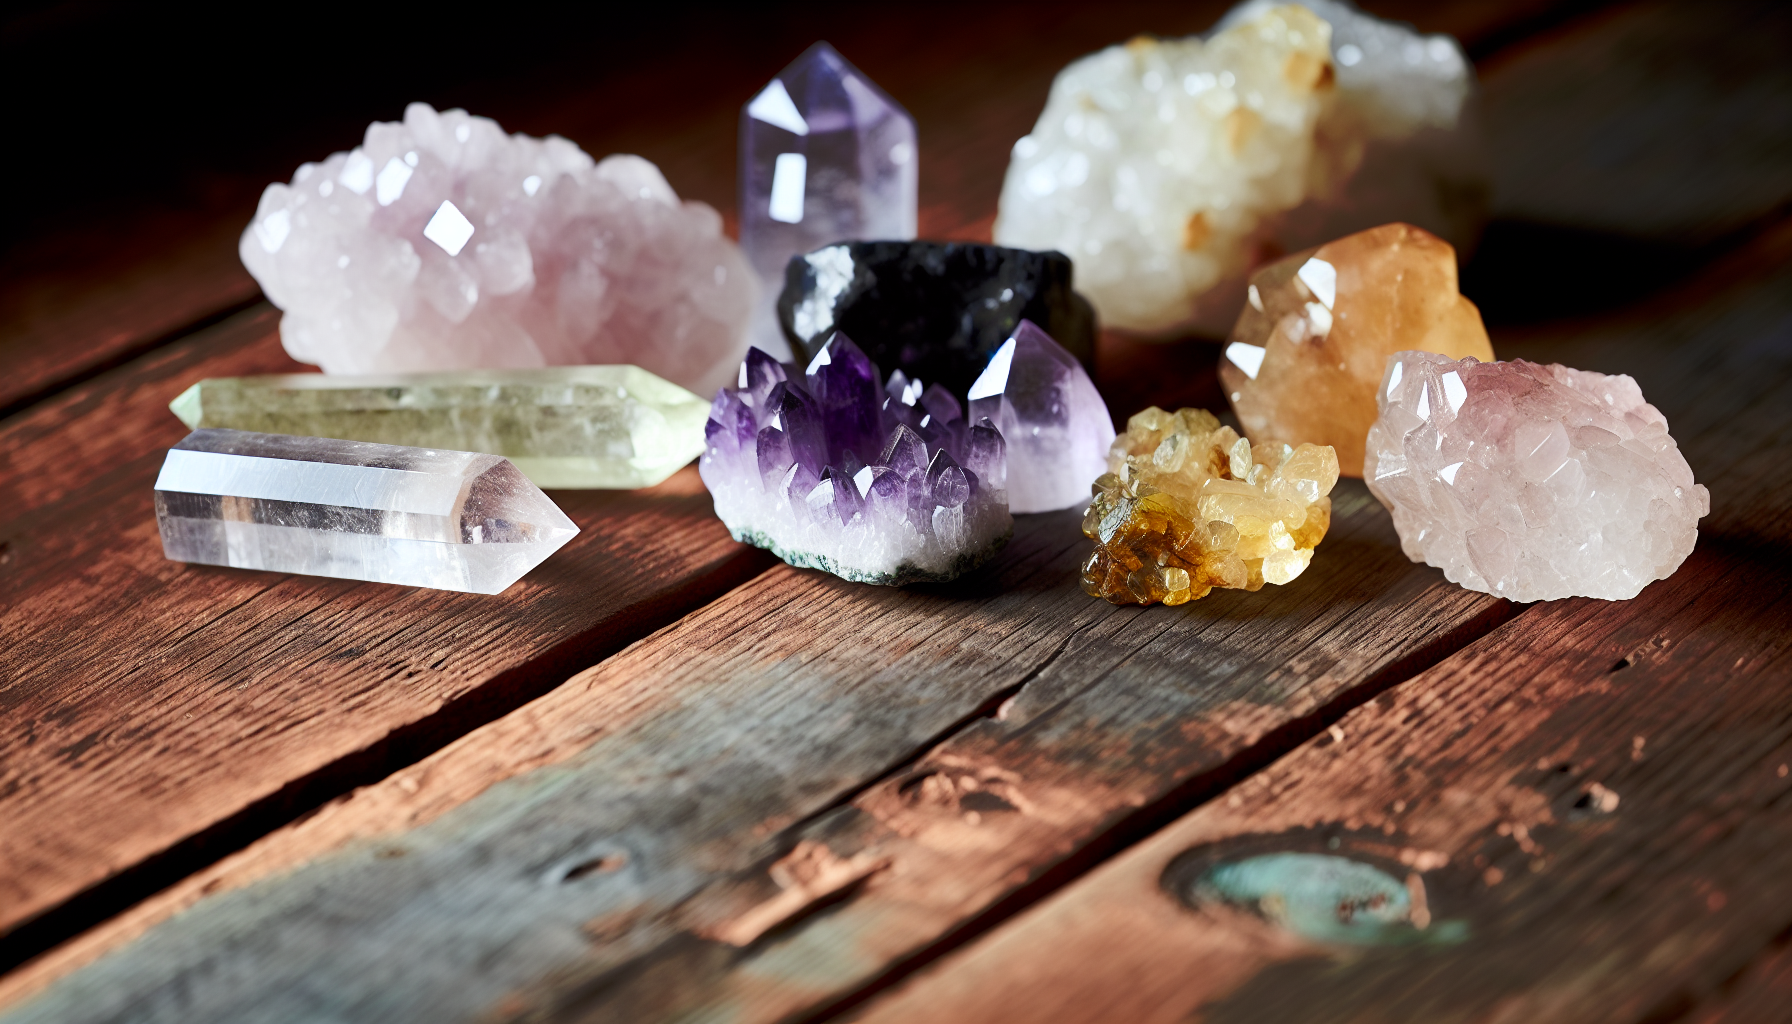 Various crystals including Clear Quartz, Amethyst, Citrine, and Black Tourmaline